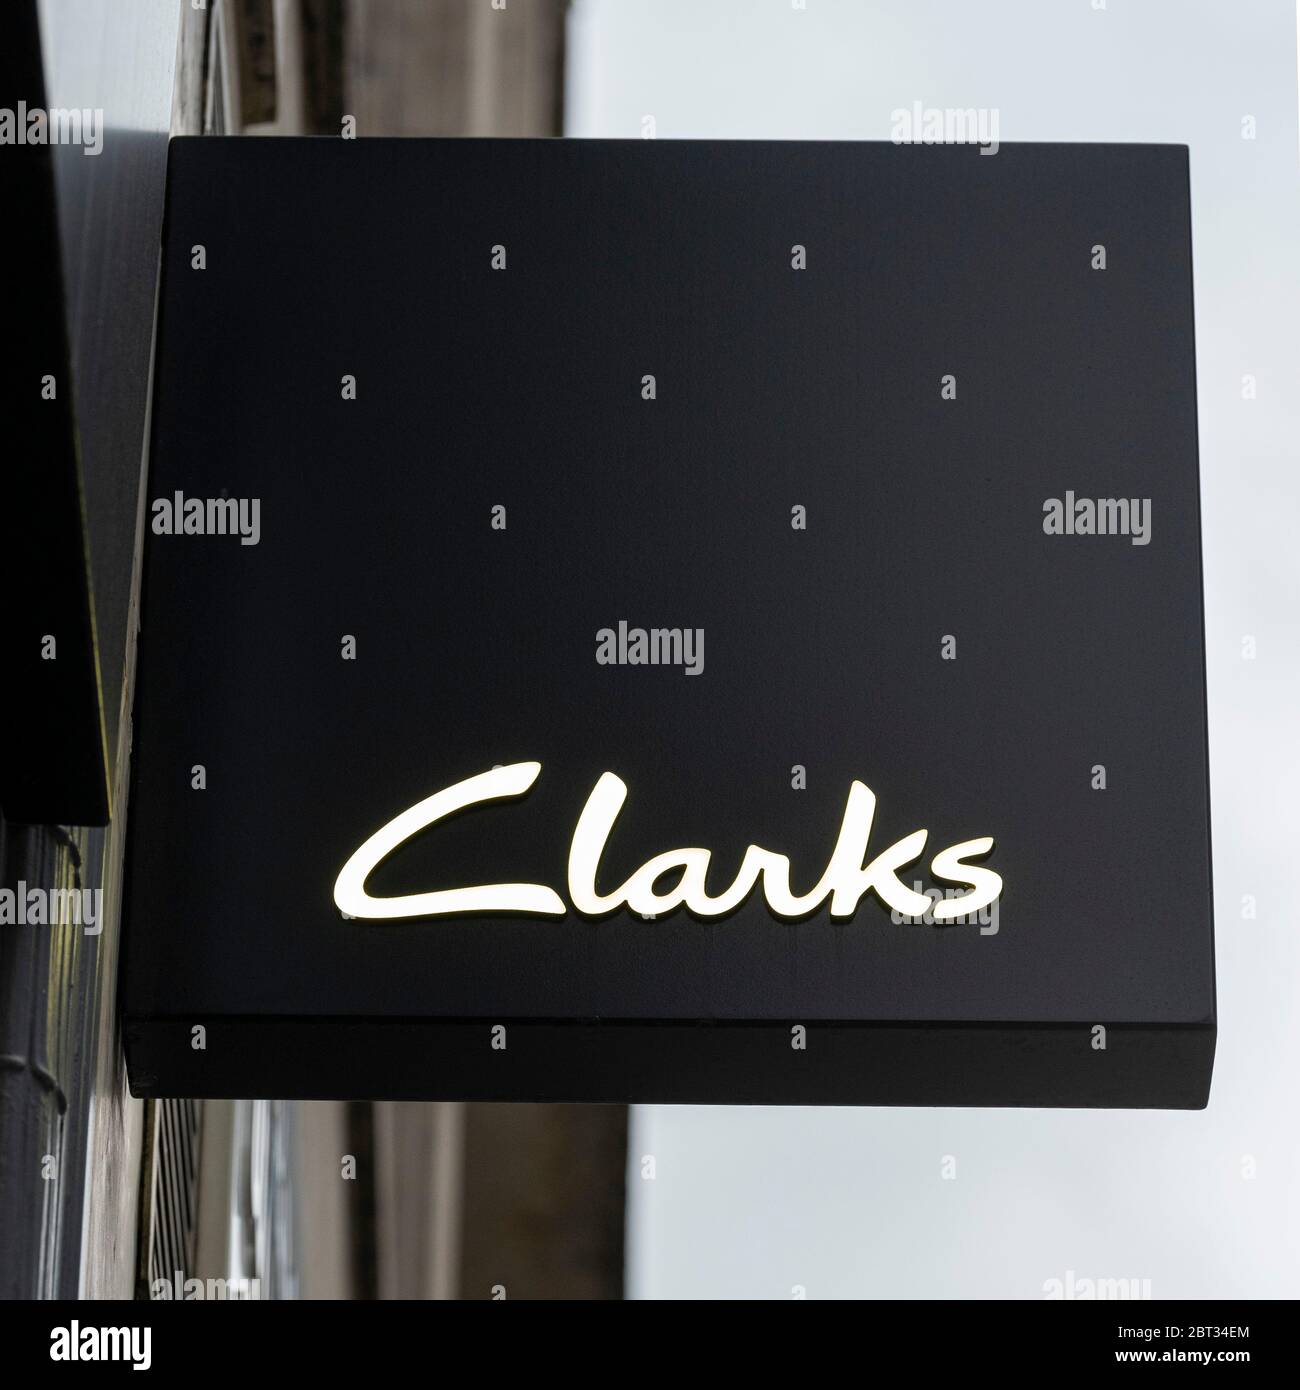 Clarks logo seen on one of their branches at Oxford Street.British-based  international shoe manufacturer and retailer C. & J. Clark international  Ltd, trading as clarks is to cut nearly 1,000 head office